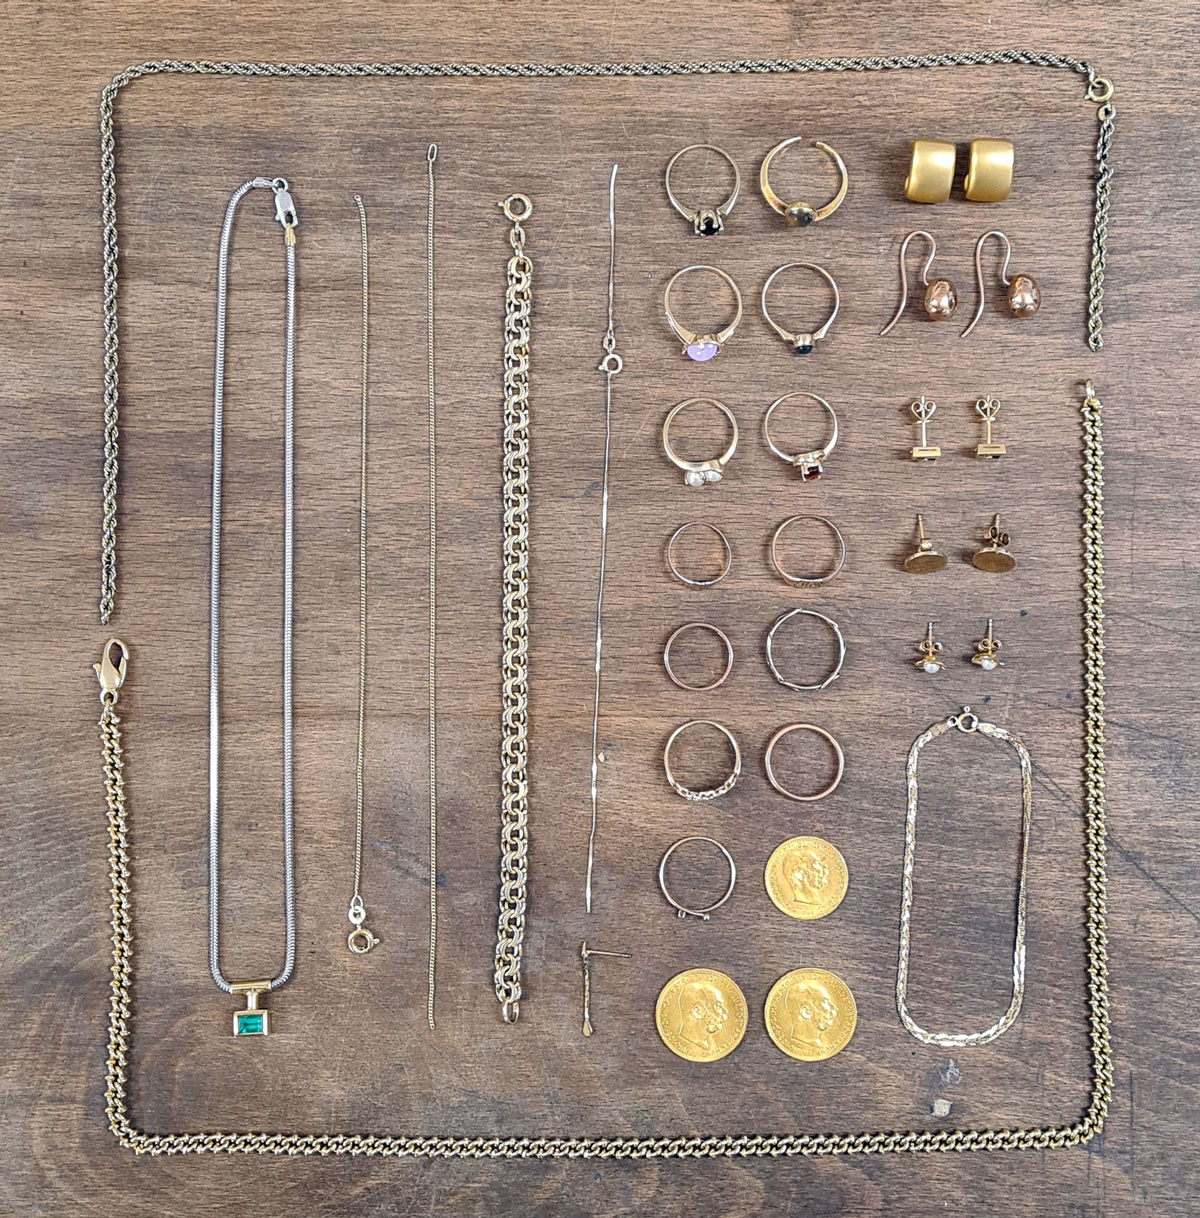 Flat lay of gold chain, earrings, bracelets and coins on a wooden bench.